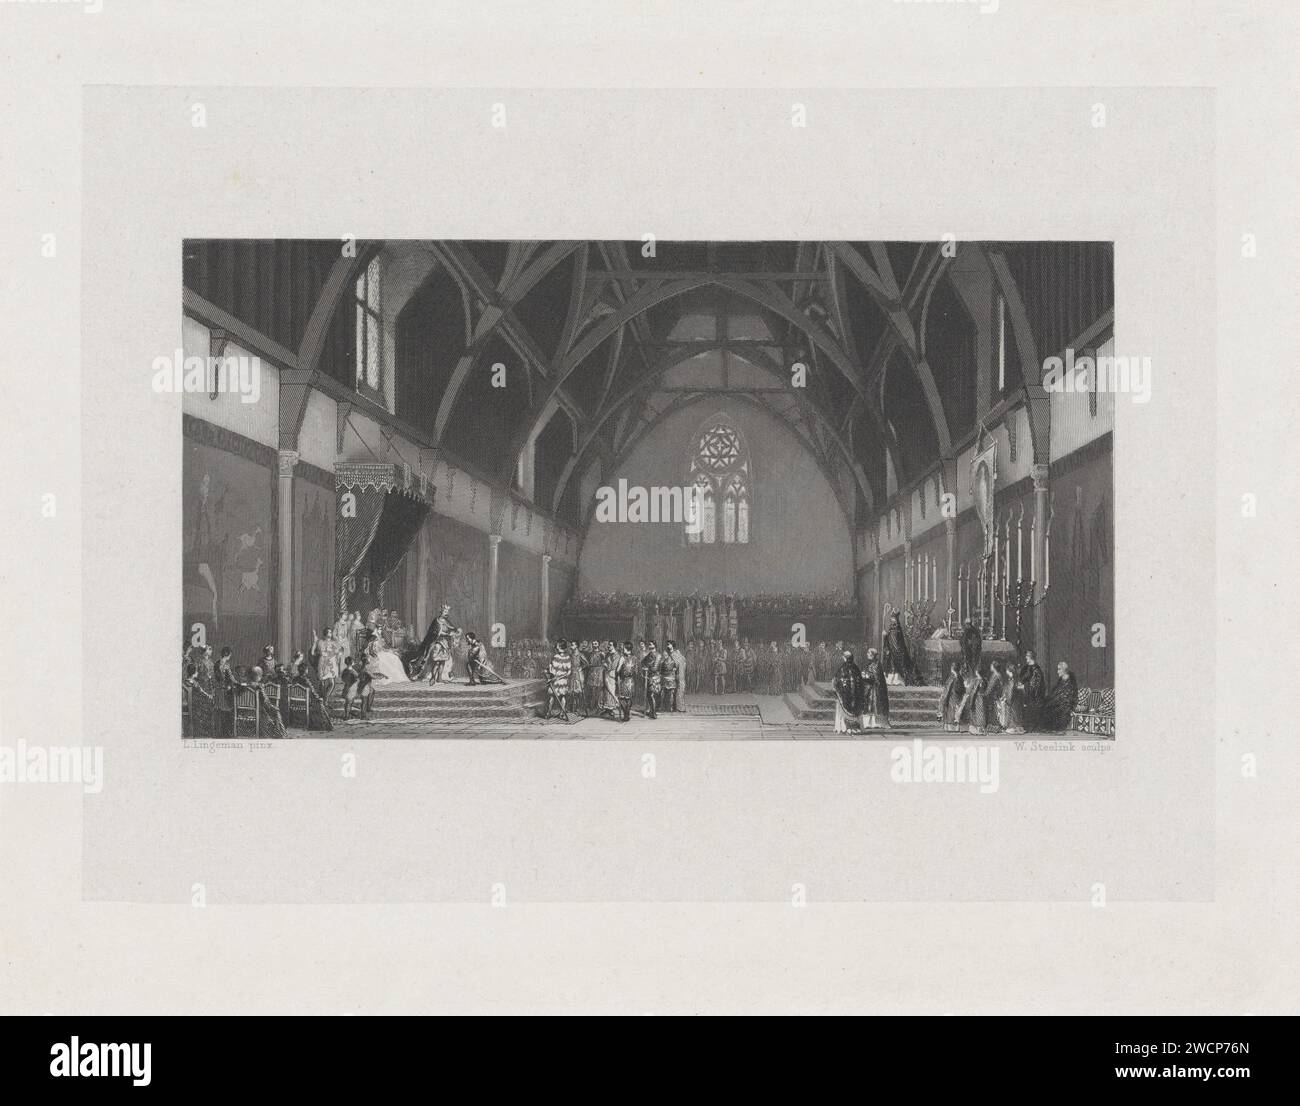 Count Floris V founded the Order of St Jacob, 1290, Willem Steelink (I), After Lambertus Lingeman, 1836 - 1906 print Count Floris V founded the Order of St. Jacob in 1290. Ceremony in the interior of the Ridderzaal. Amsterdam paper. steel engraving / etching knighthood order Racing room Stock Photo